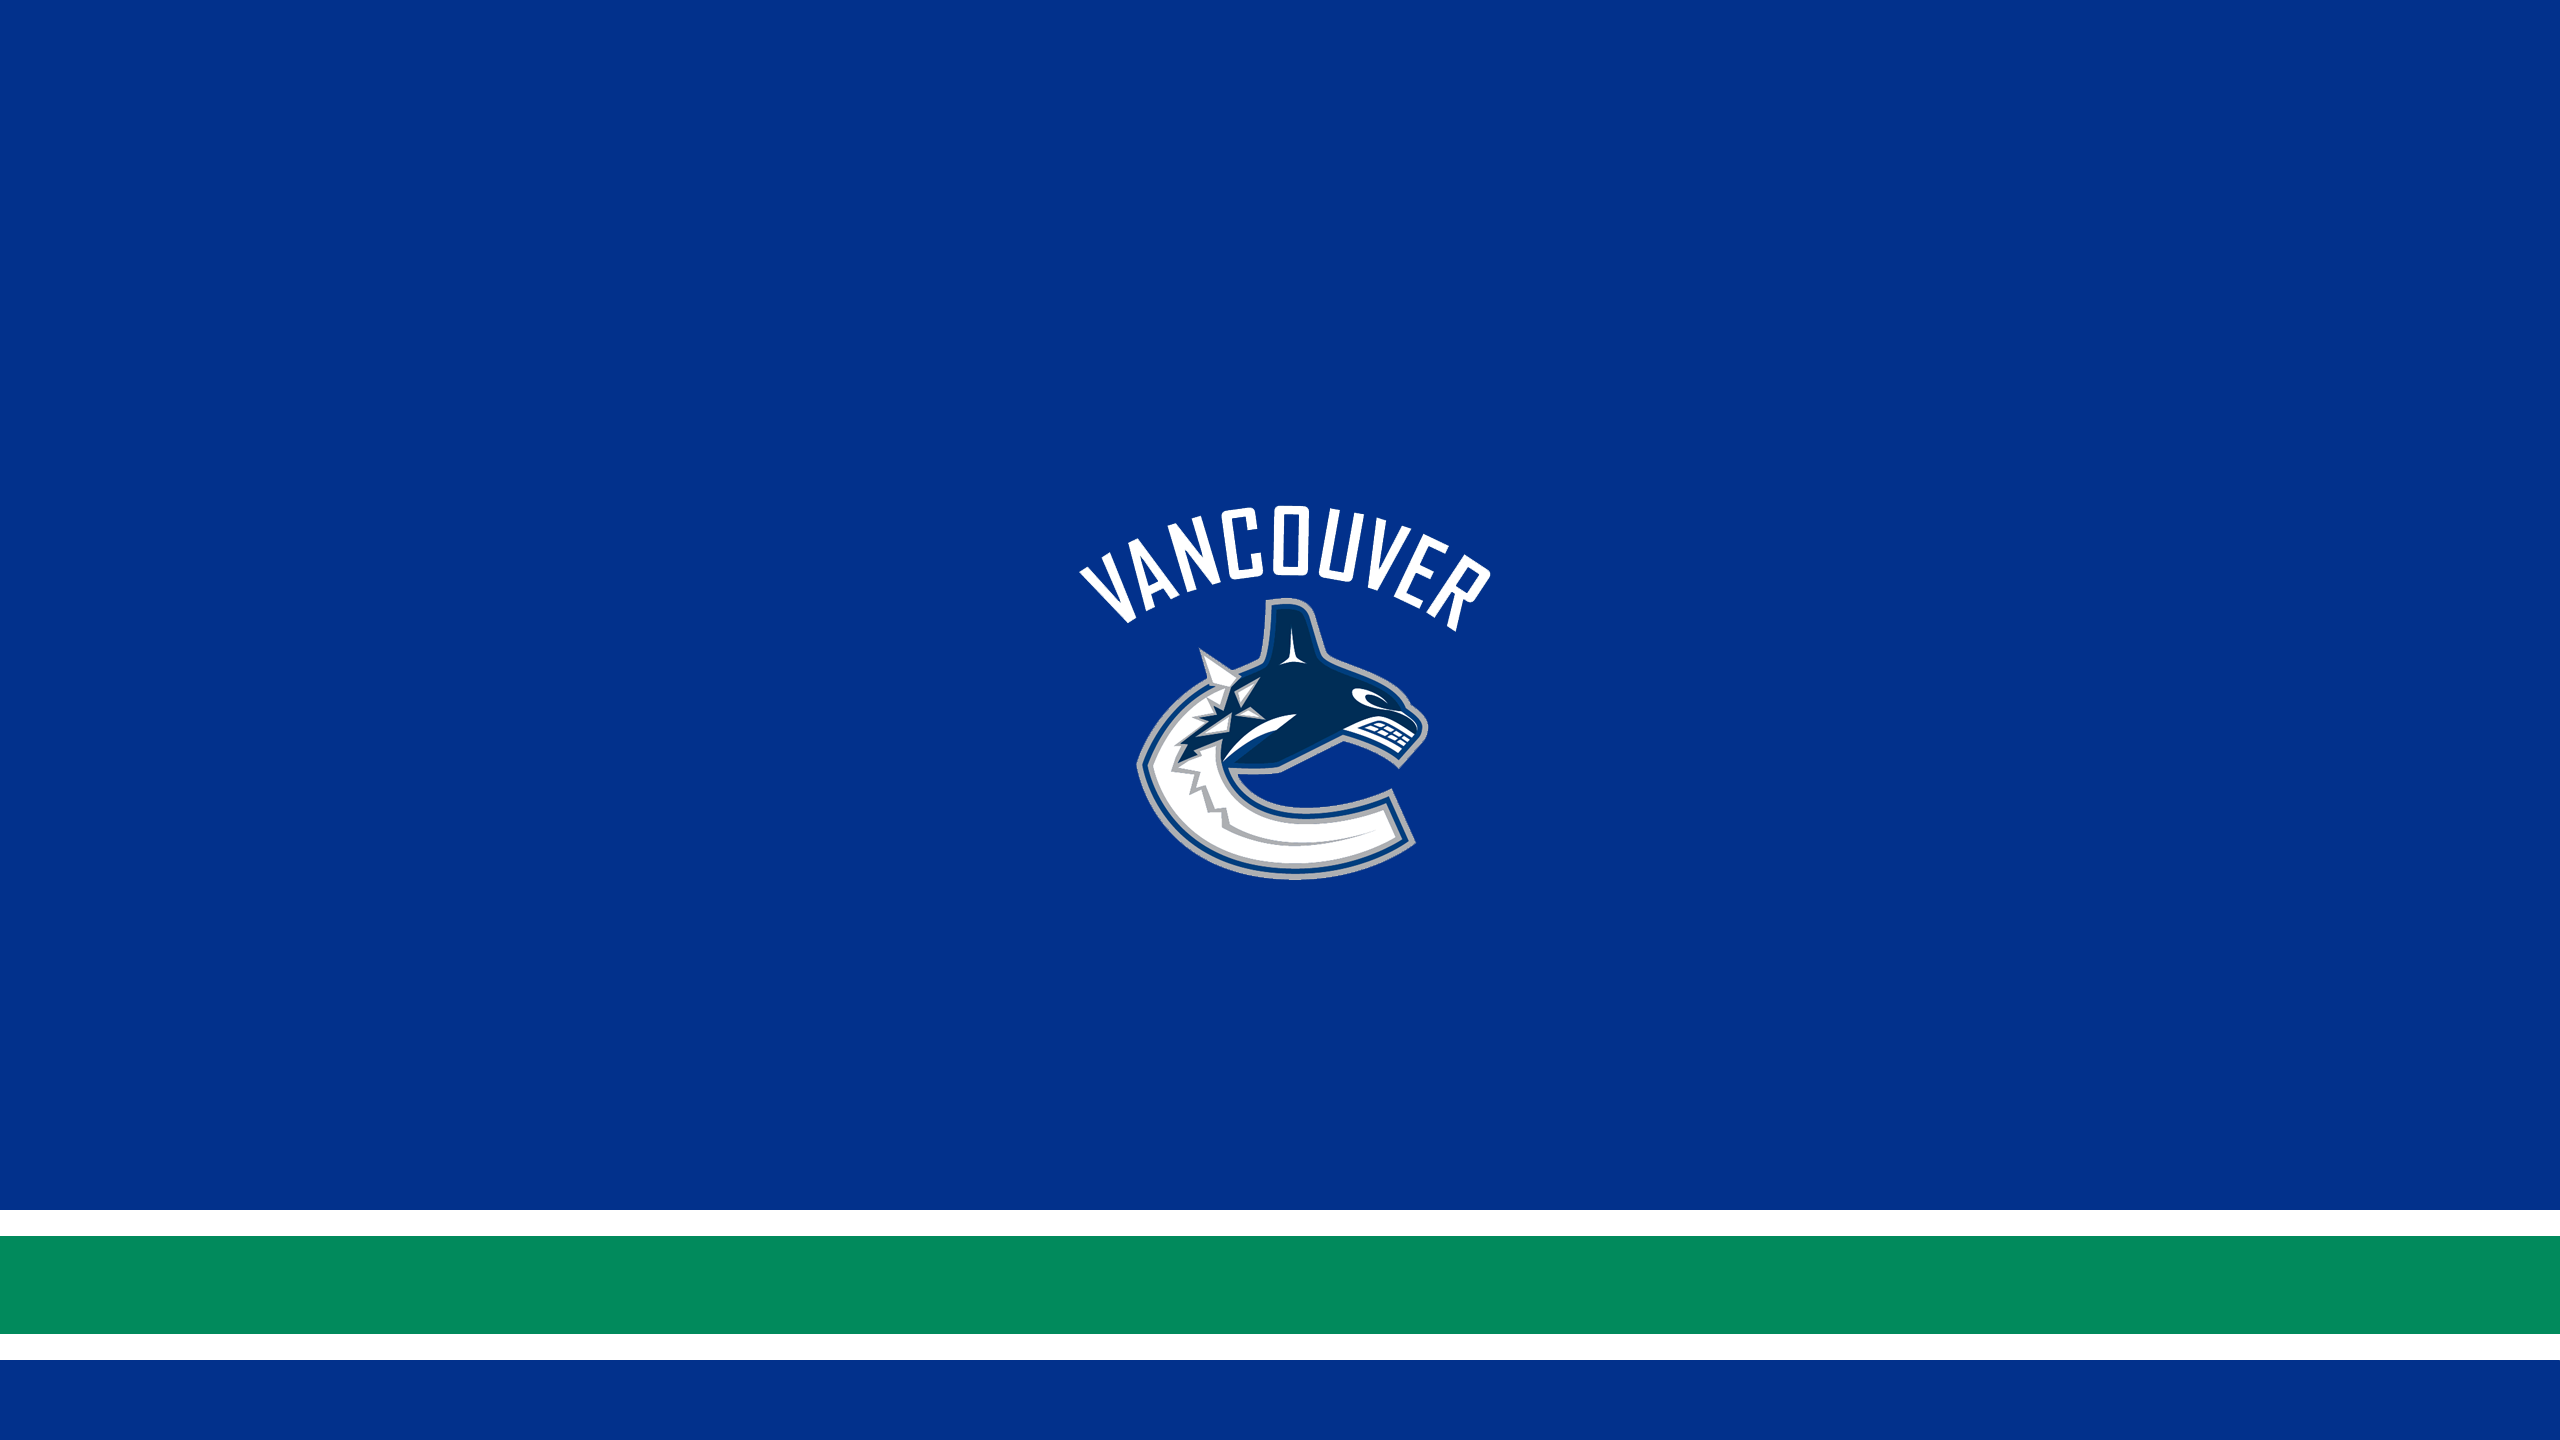 Vancouver Canucks - NHL - Square Bettor